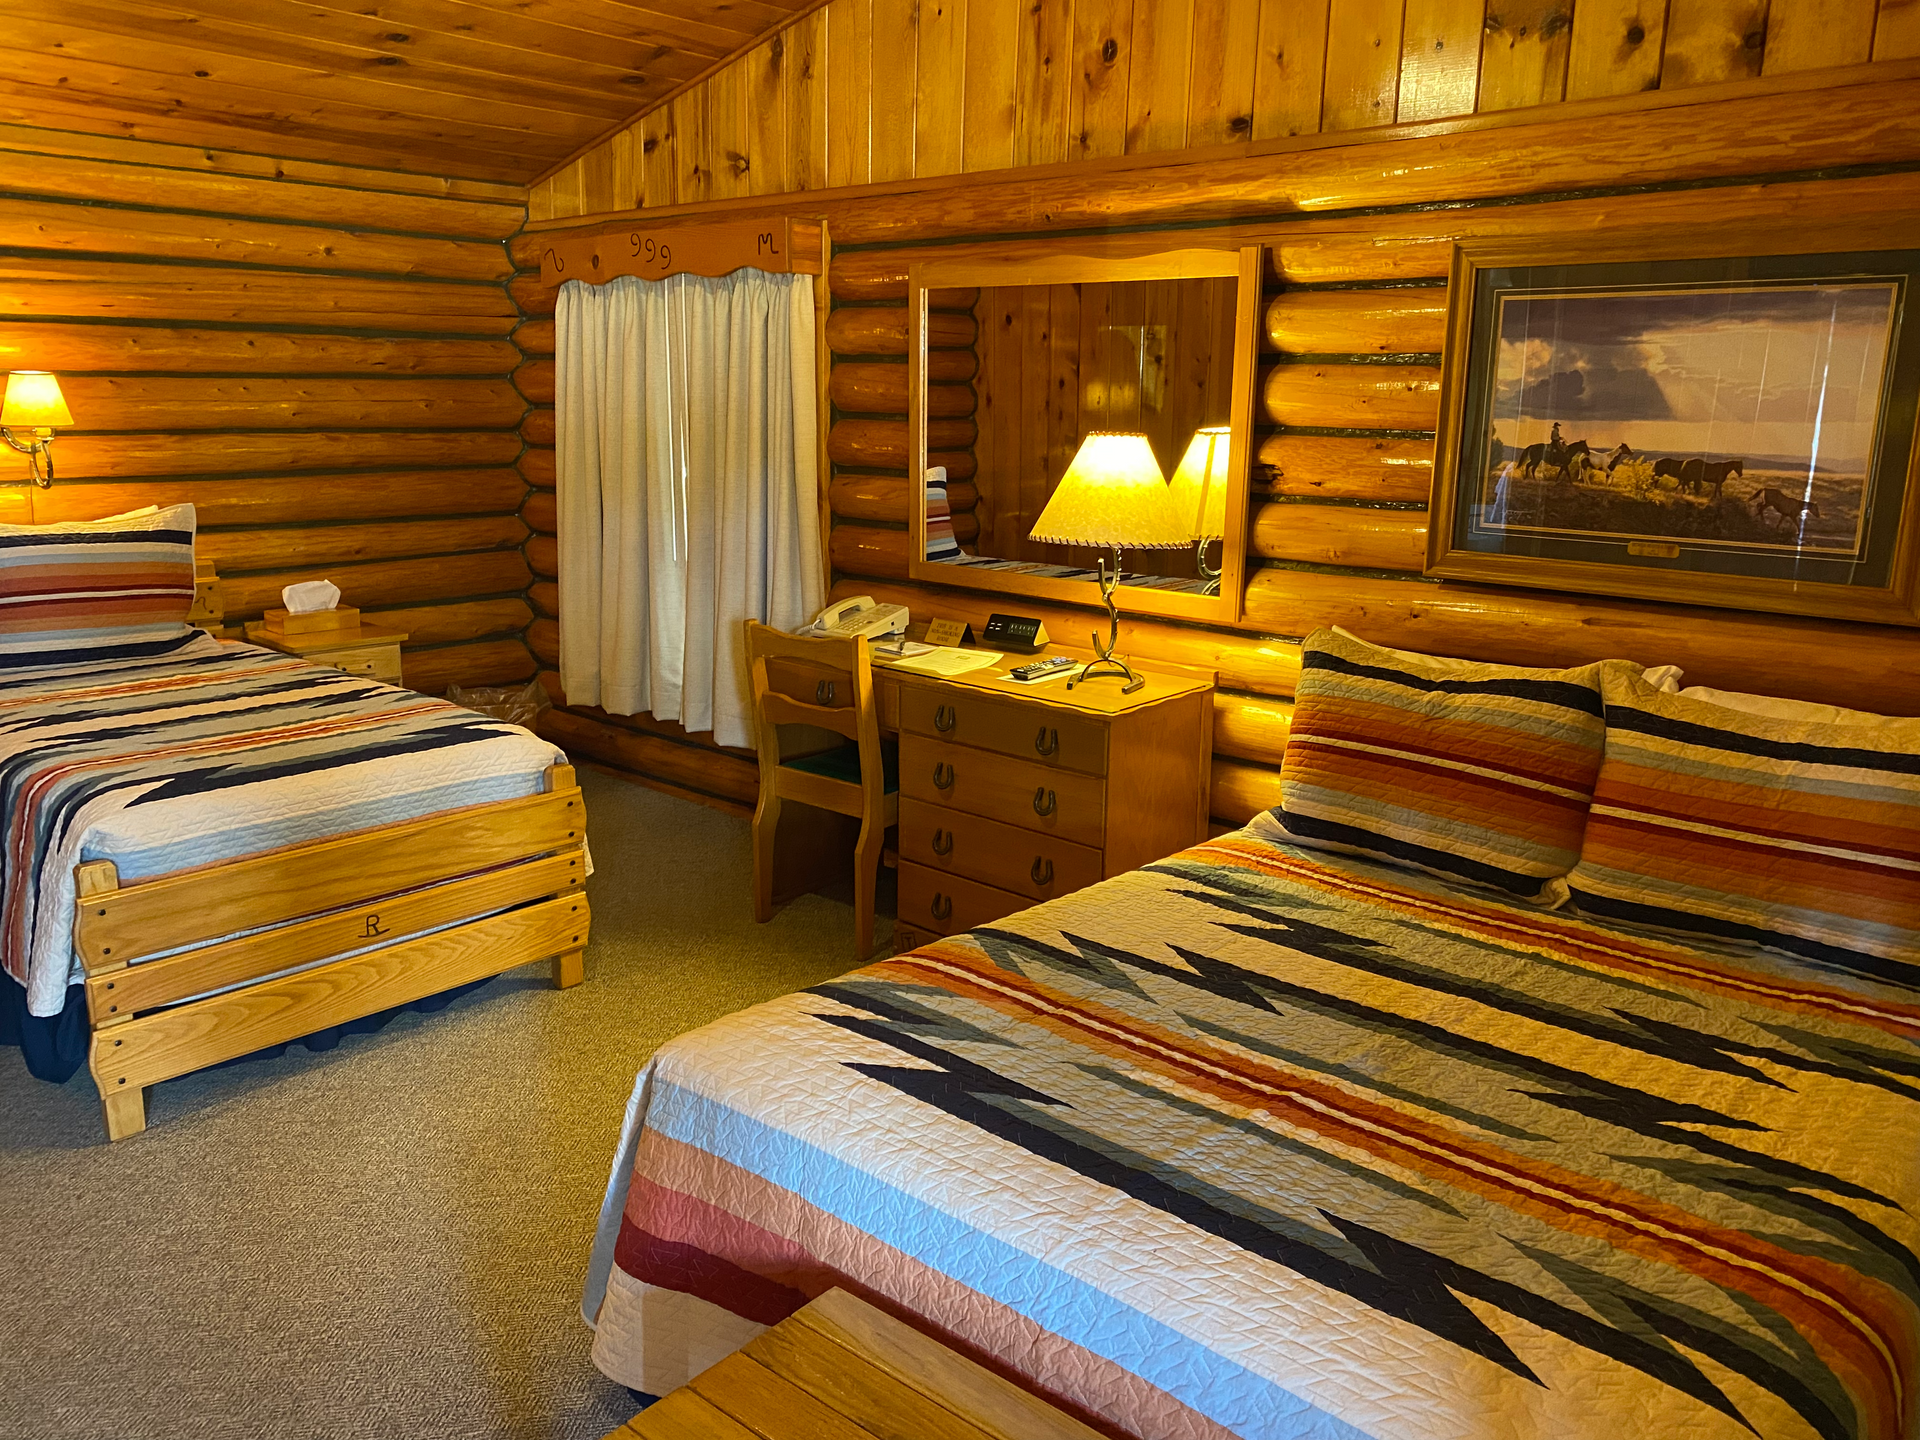 A bedroom in a log cabin with two beds and a desk.